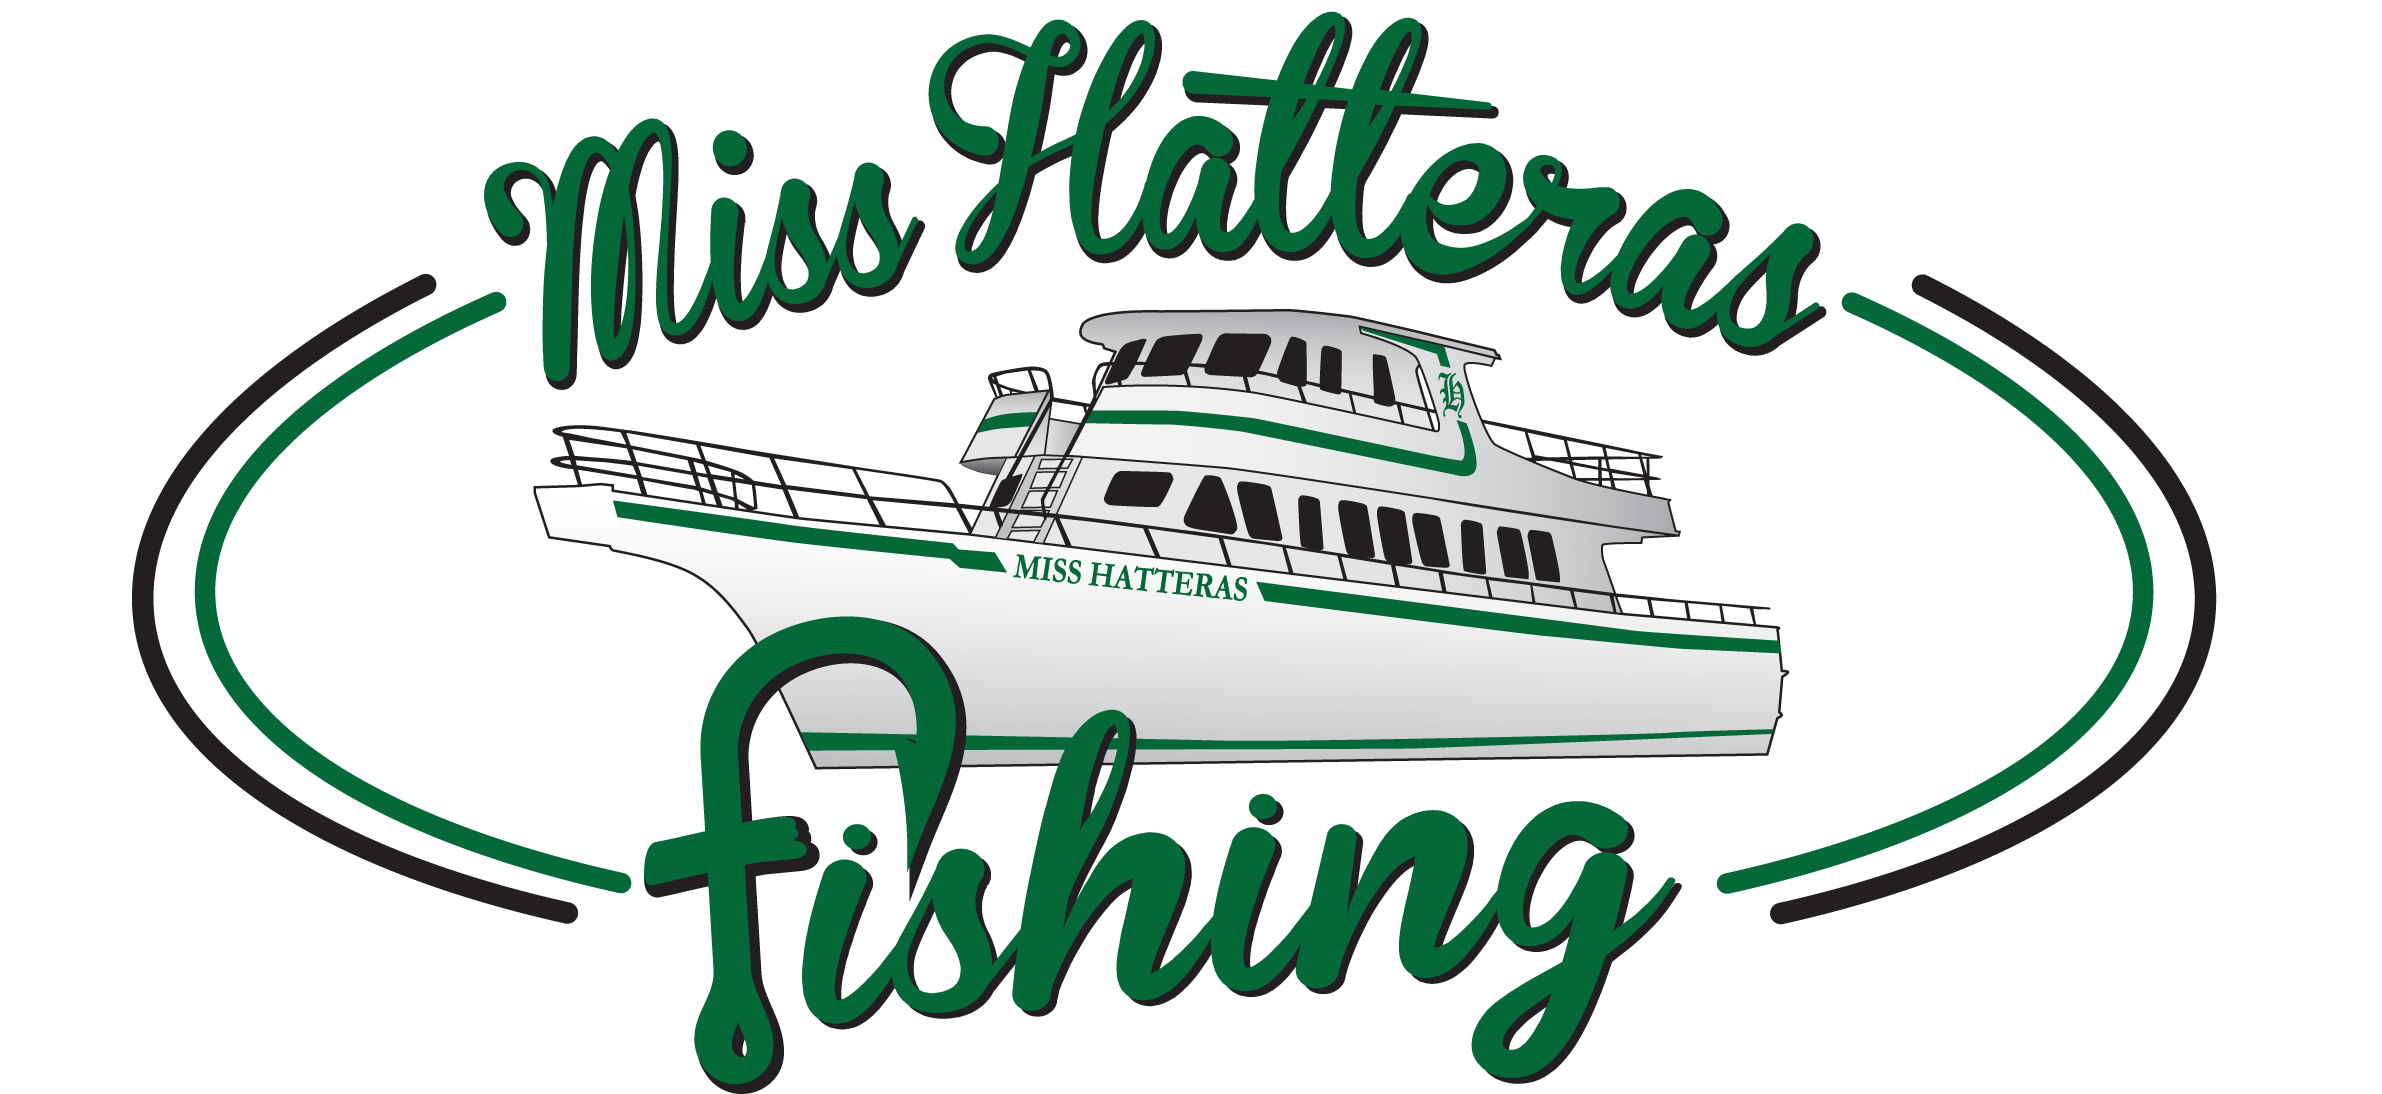 Half-Day Offshore Fishing on the Miss Hatteras Party Boat